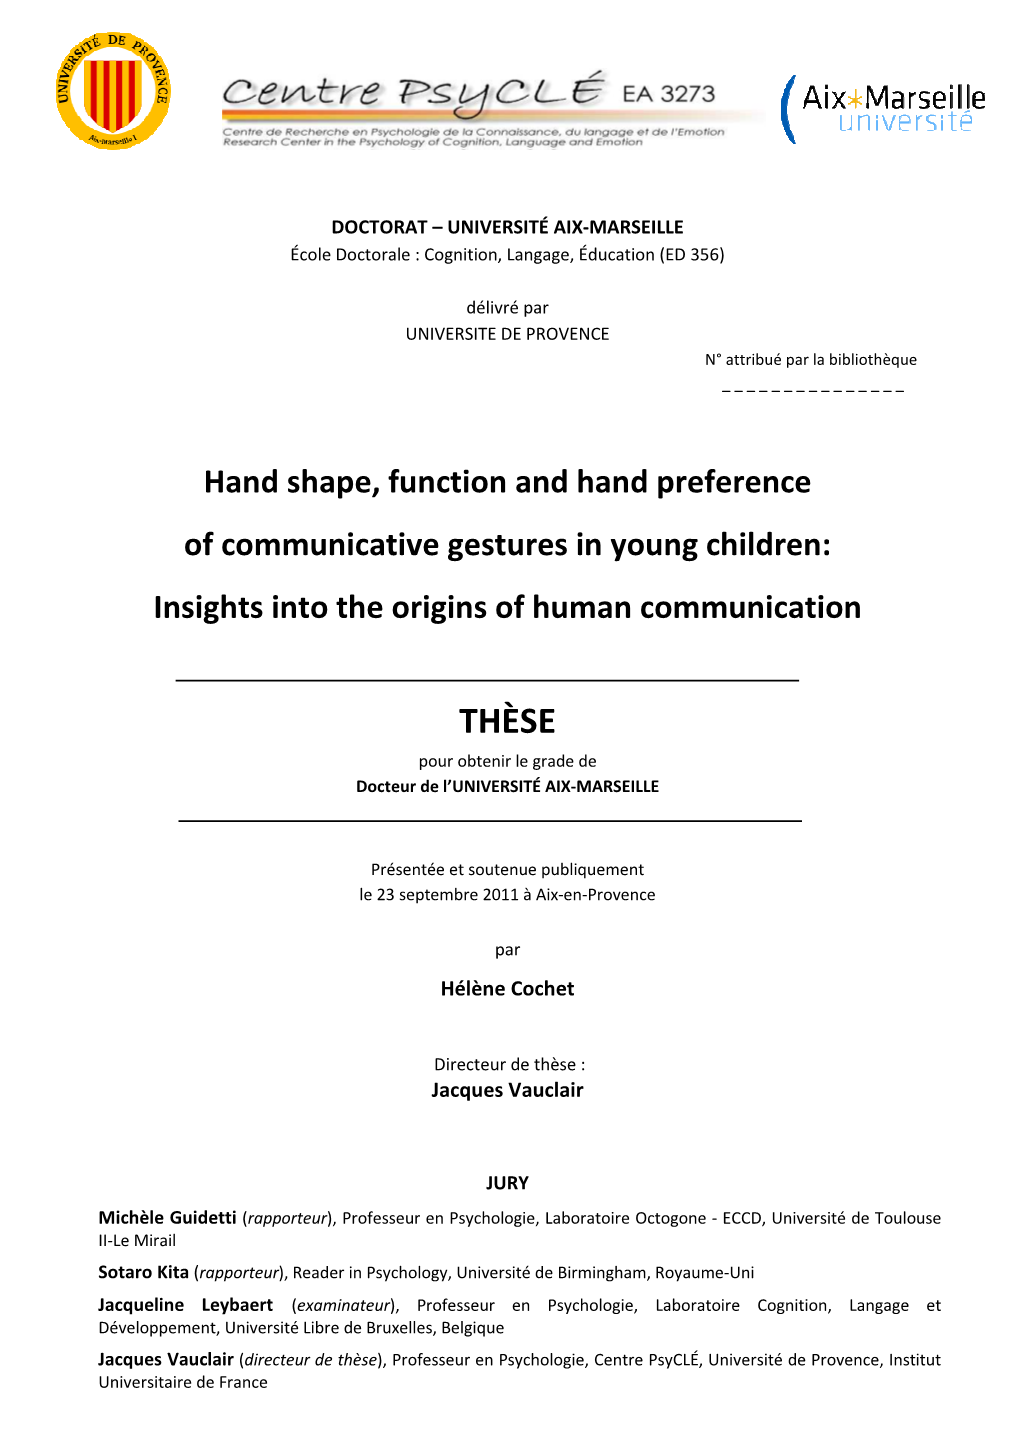 Hand Shape, Function and Hand Preference of Communicative Gestures in Young Children: Insights Into the Origins of Human Communication